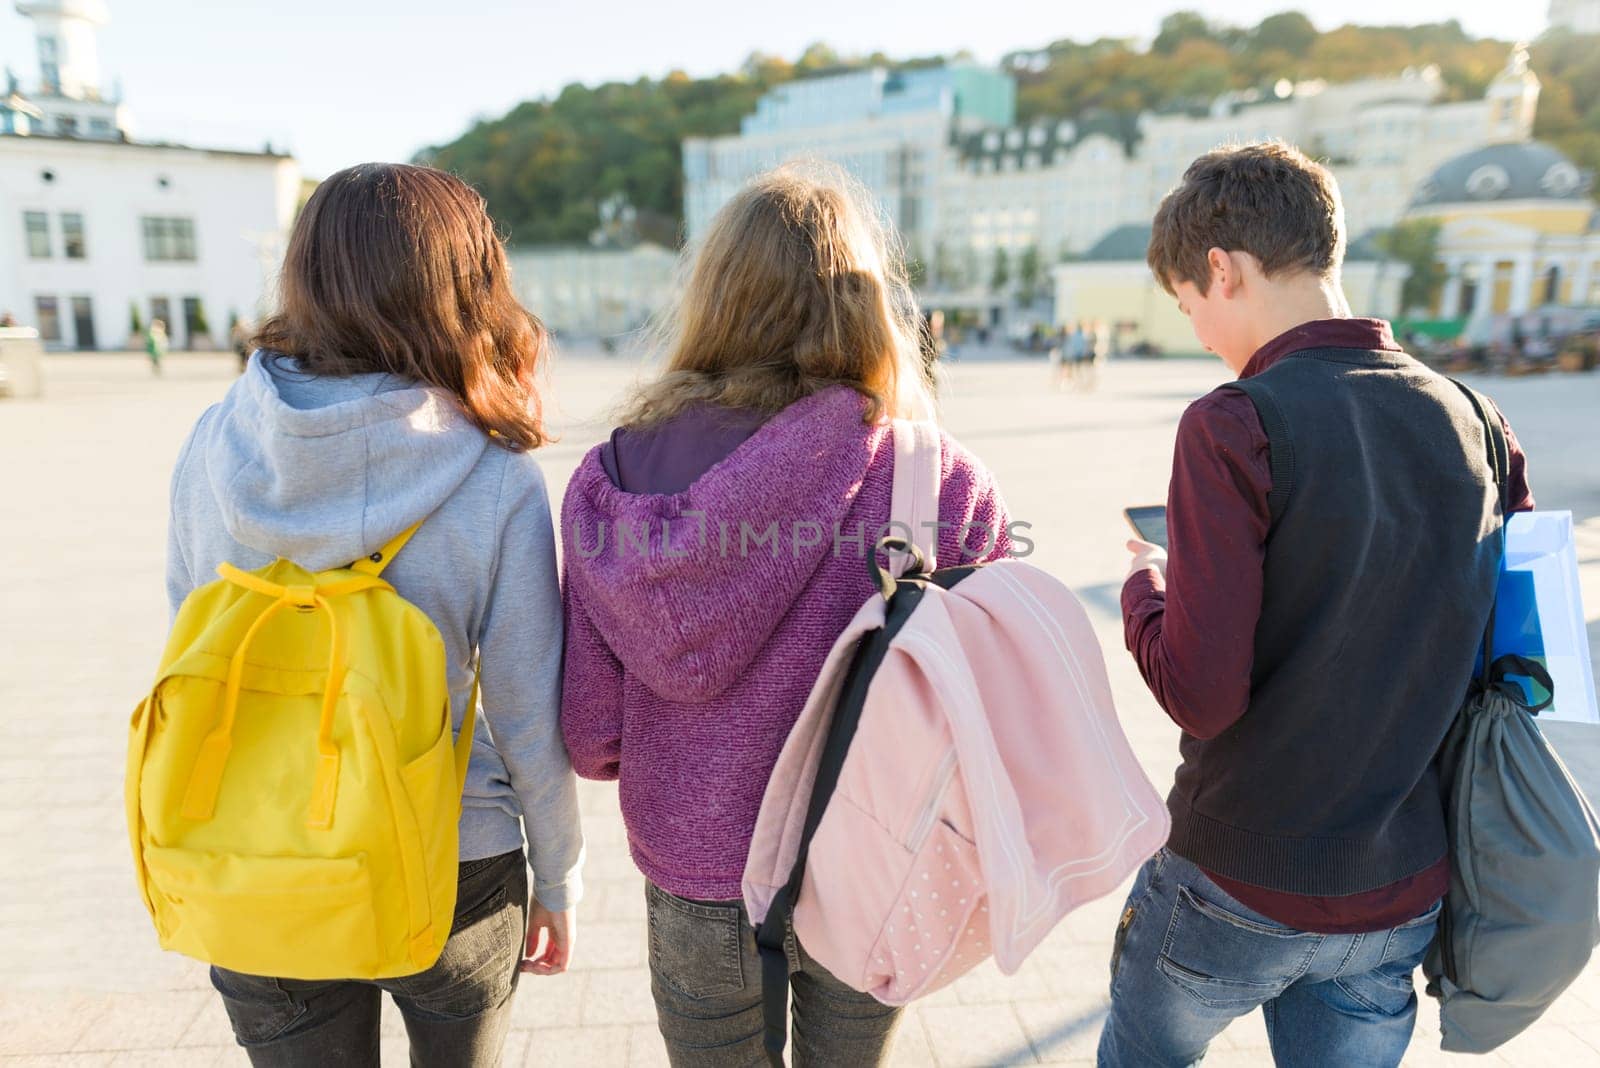 View from the back on three high school students with backpacks. City background, golden hour